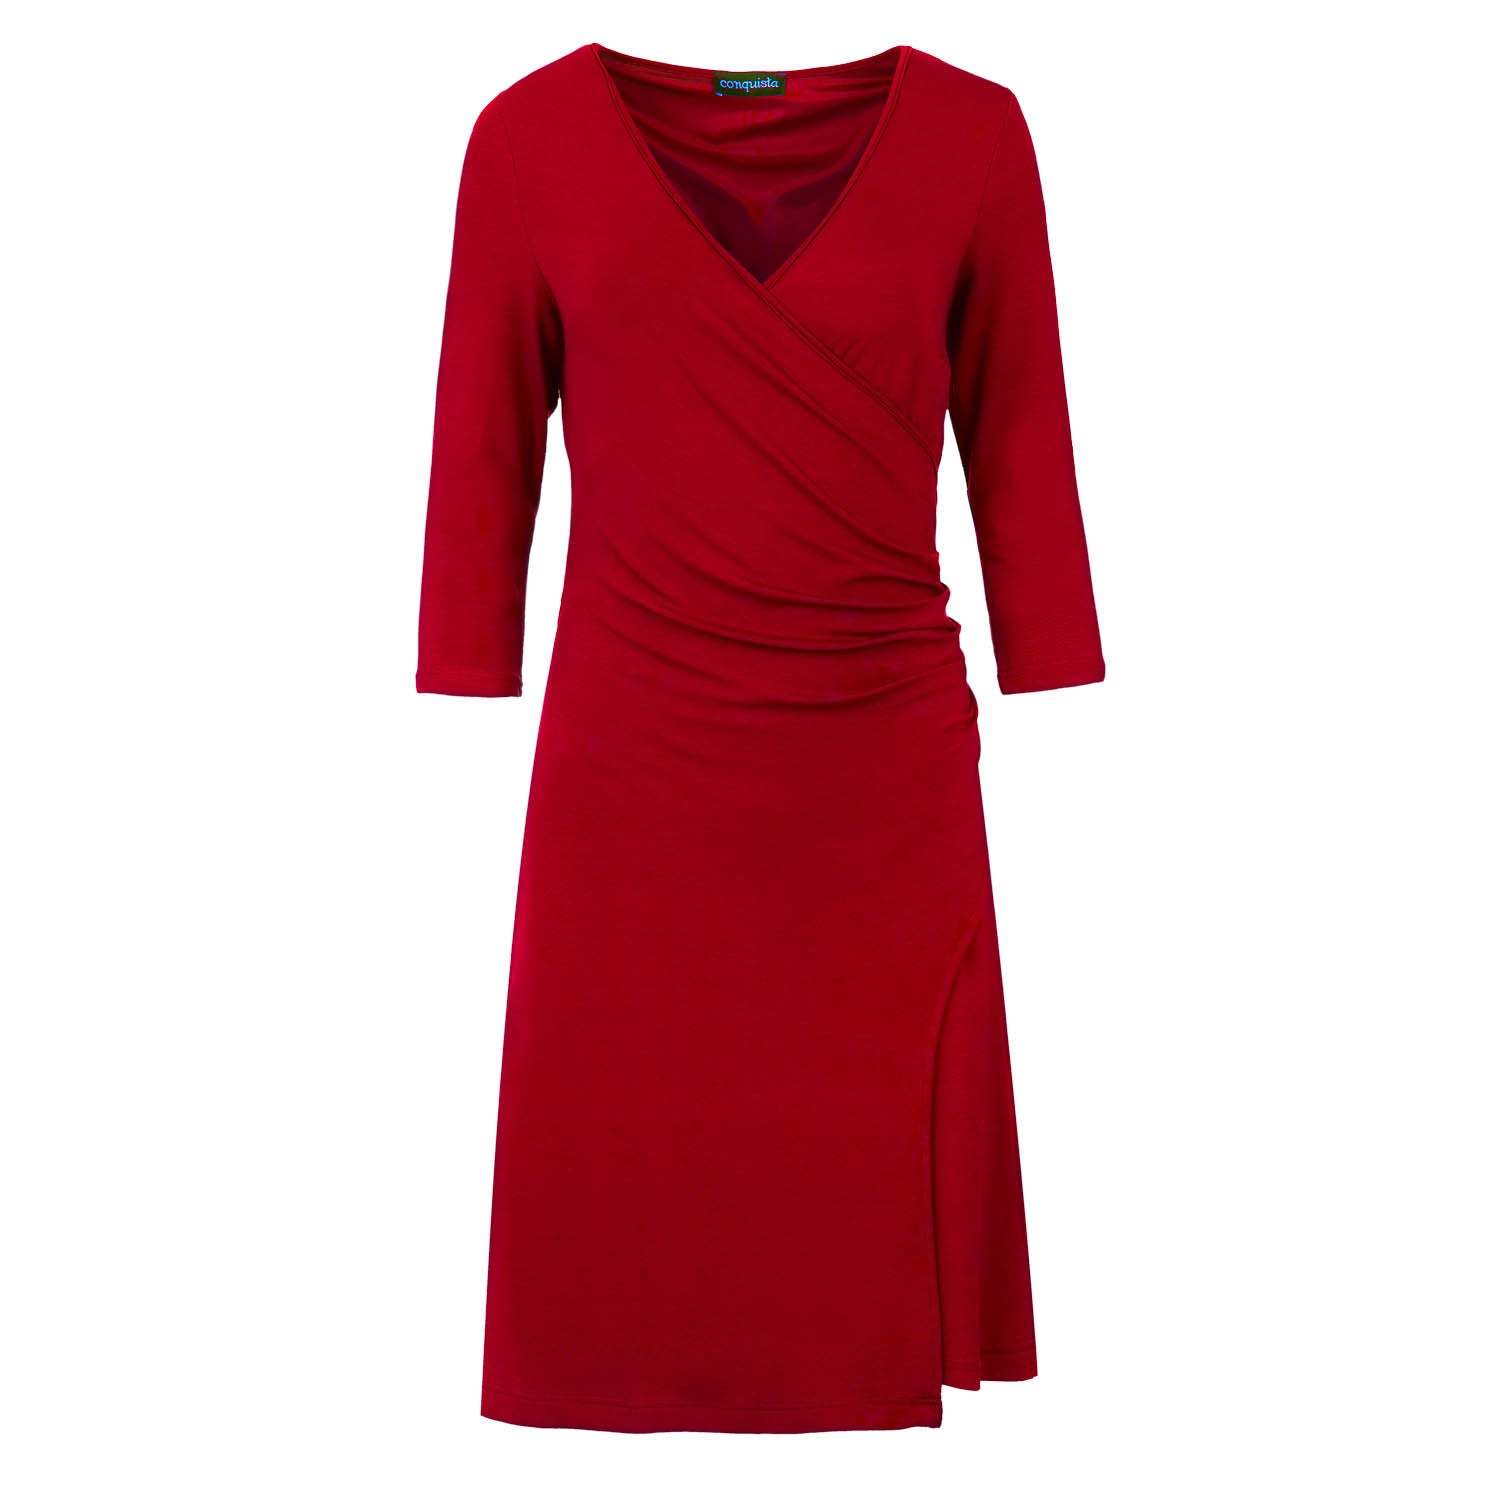 Women’s Red Faux Wrap Dress In Sustainable Fabric XXXL Conquista